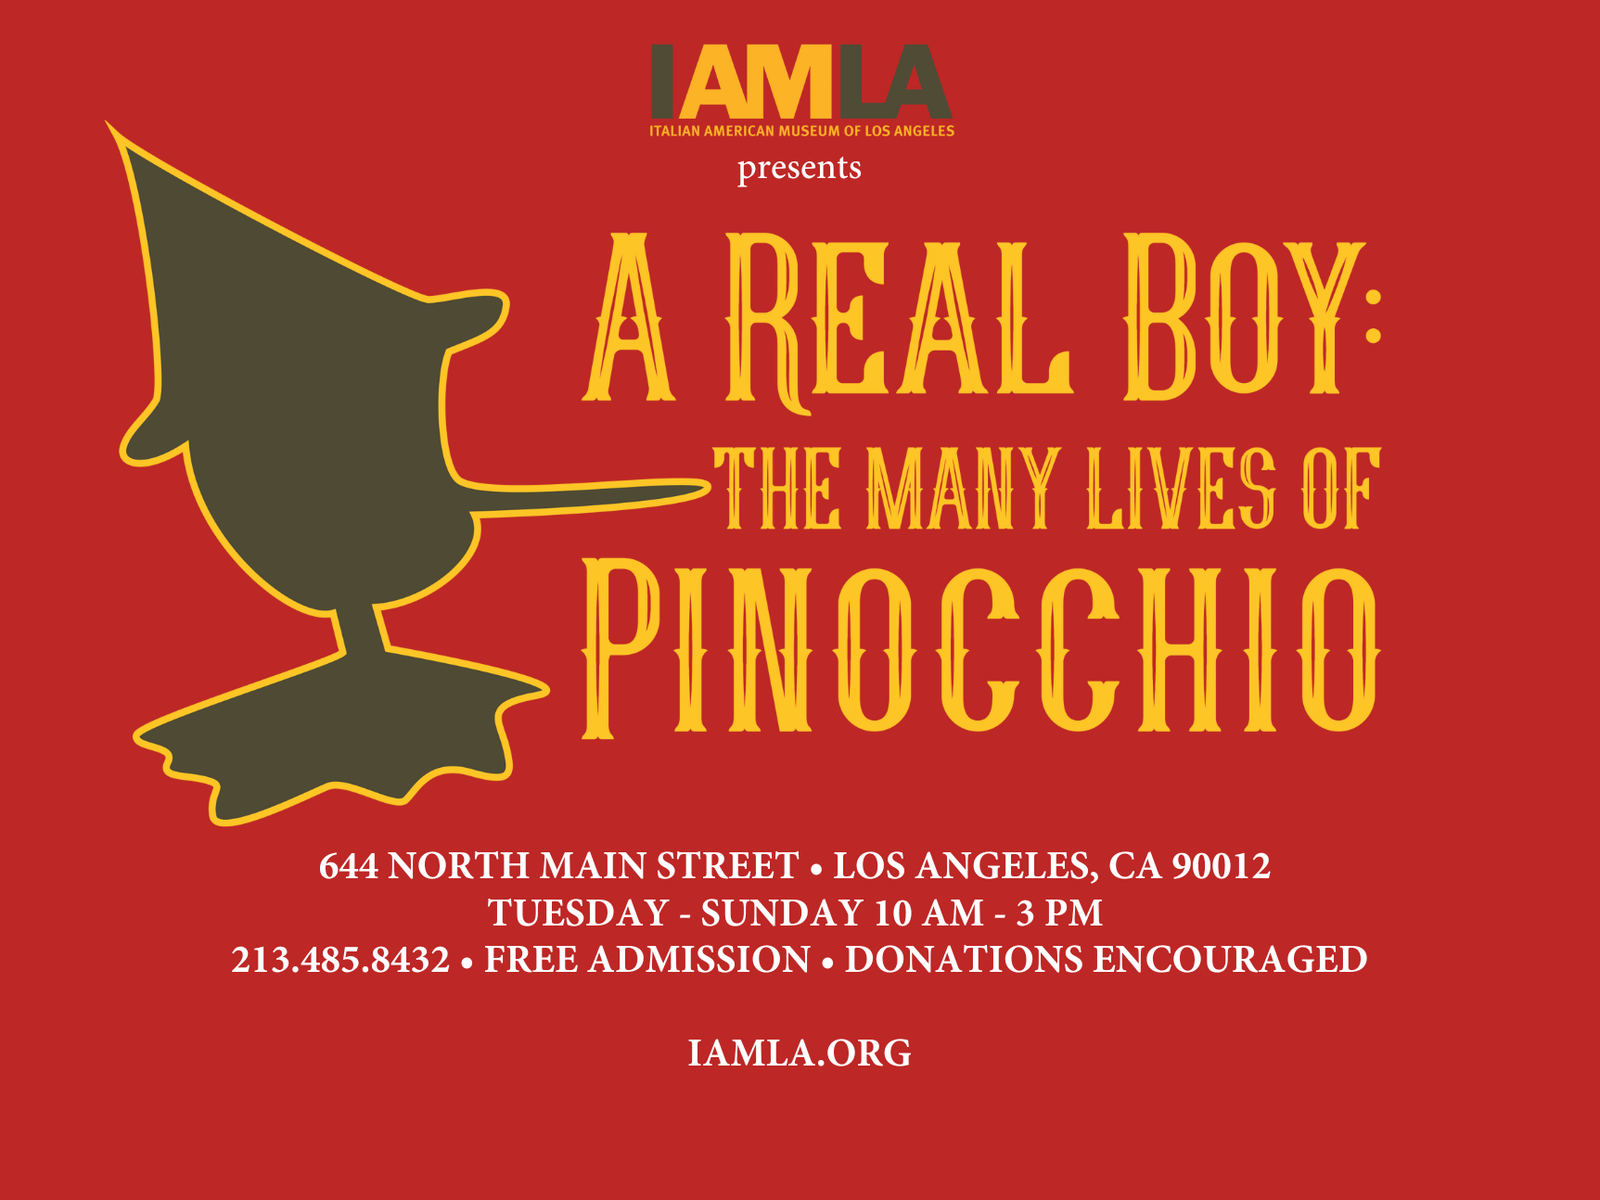 A Real Boy: The Many Lives of Pinocchio examines Pinocchio’s cultural origins, adaptations and everlasting cultural impact.